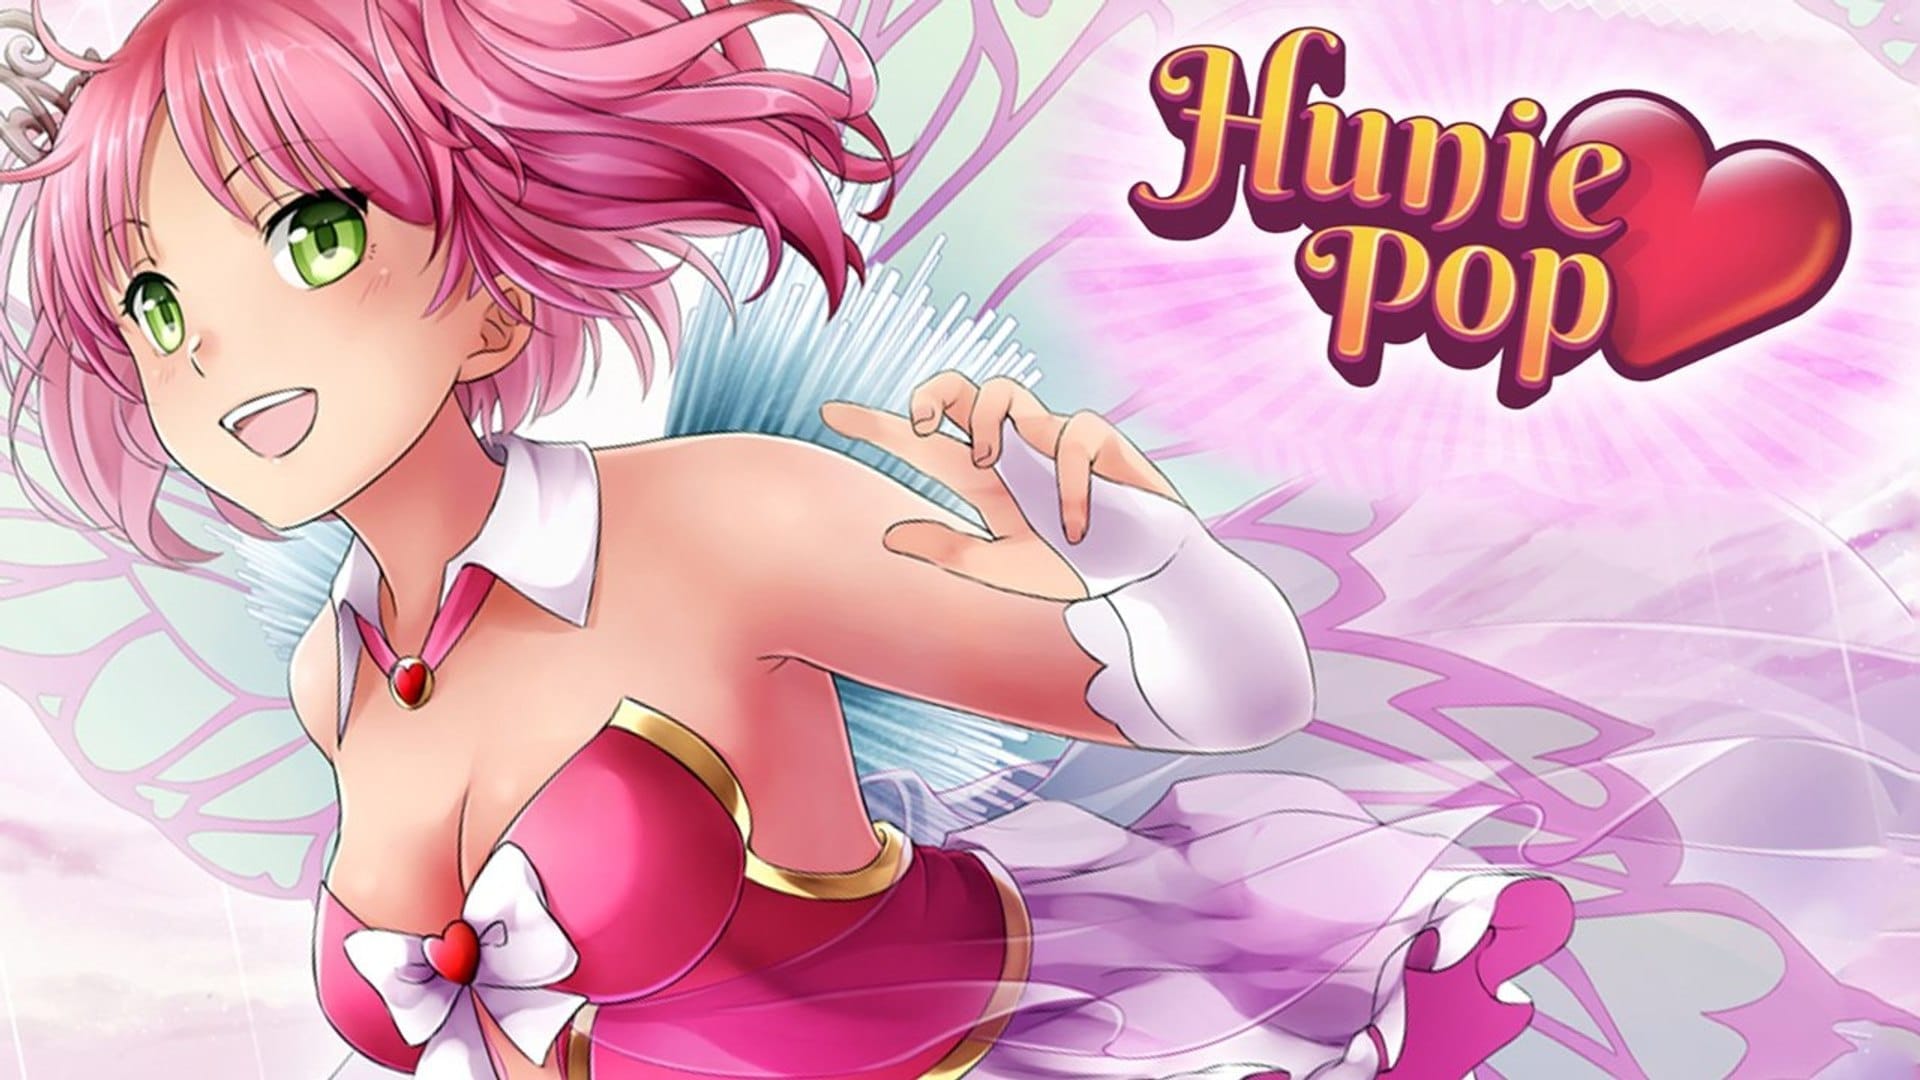 bharath sk recommends All Pictures From Huniepop